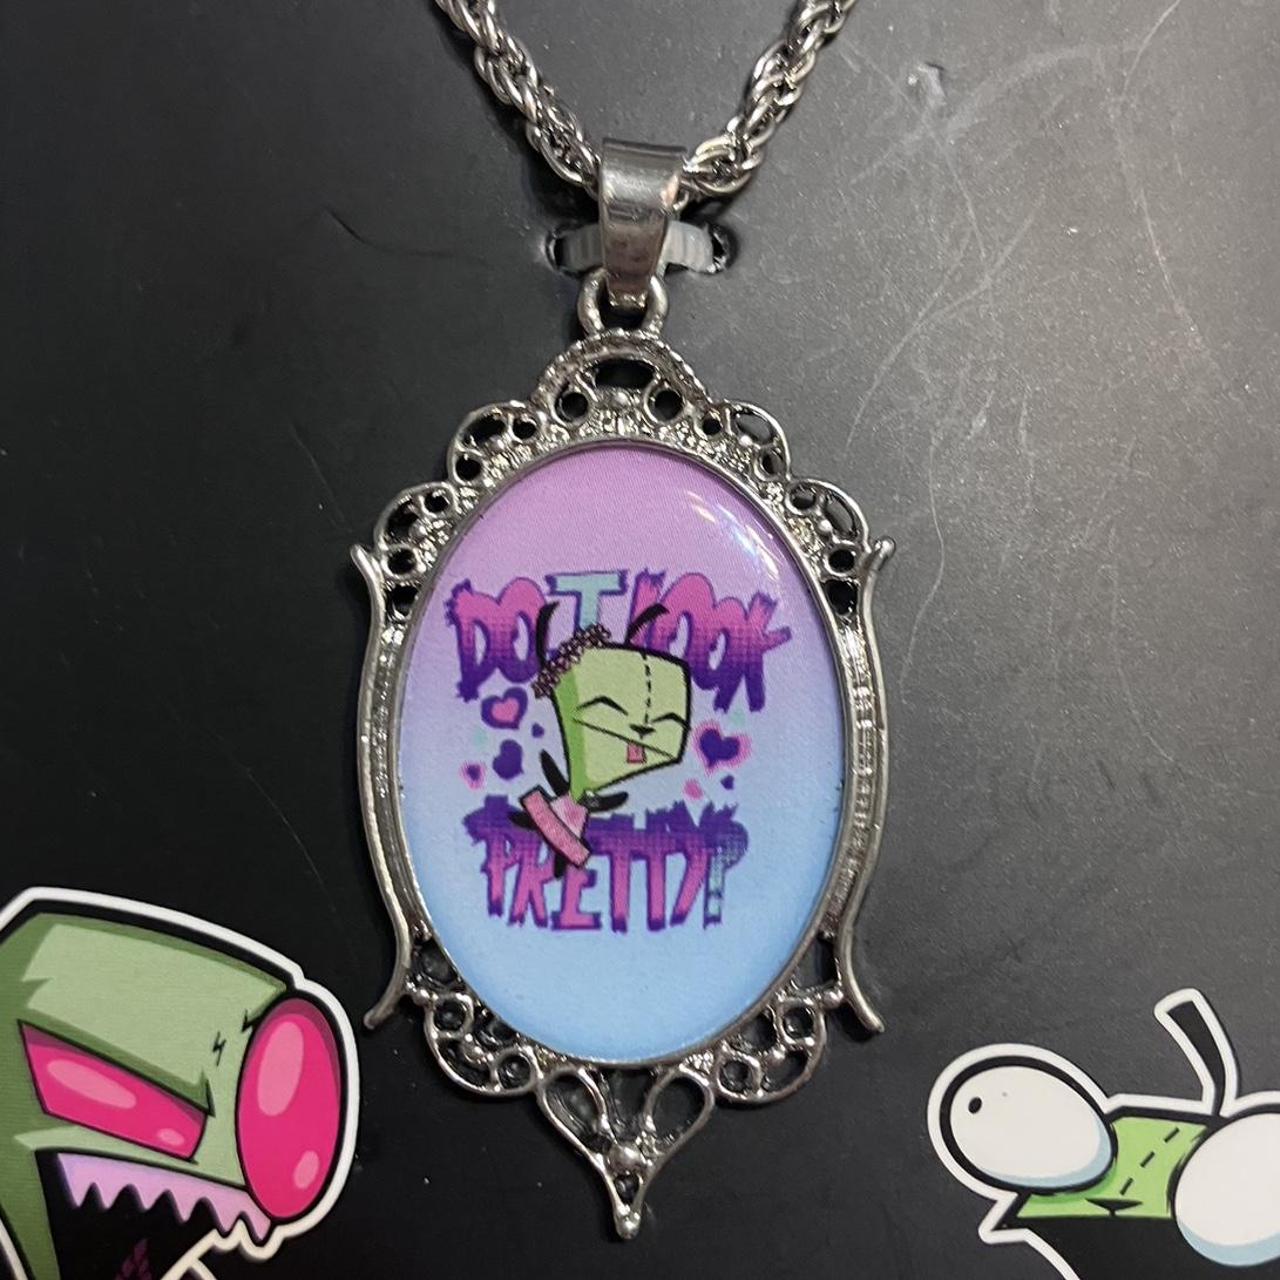 Invader zim GIR chrarm necklace for Sale in Sharon Hill, PA - OfferUp